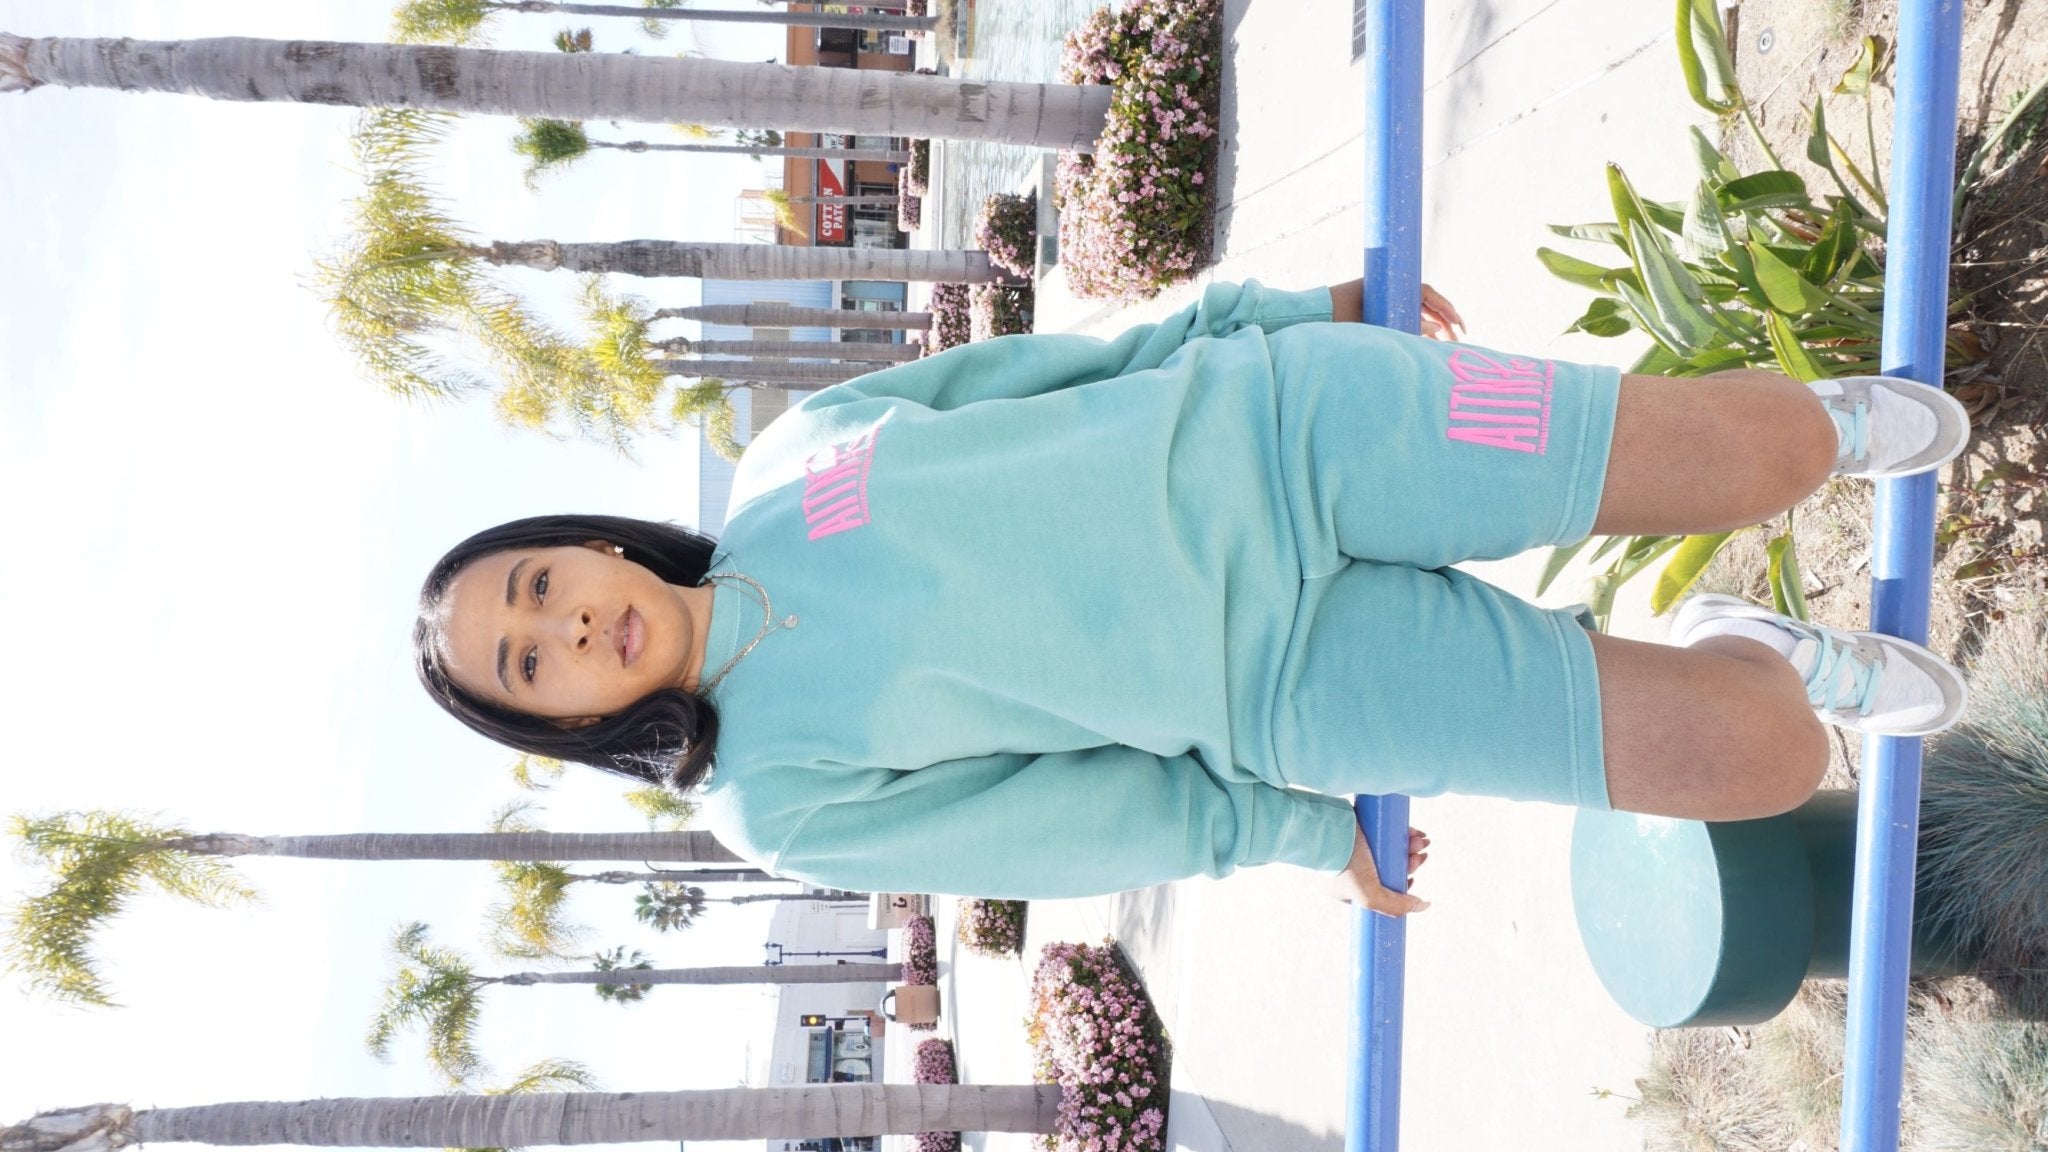 AITNP Springtime Sweat Short Essentials - Ambition Is The New Pink